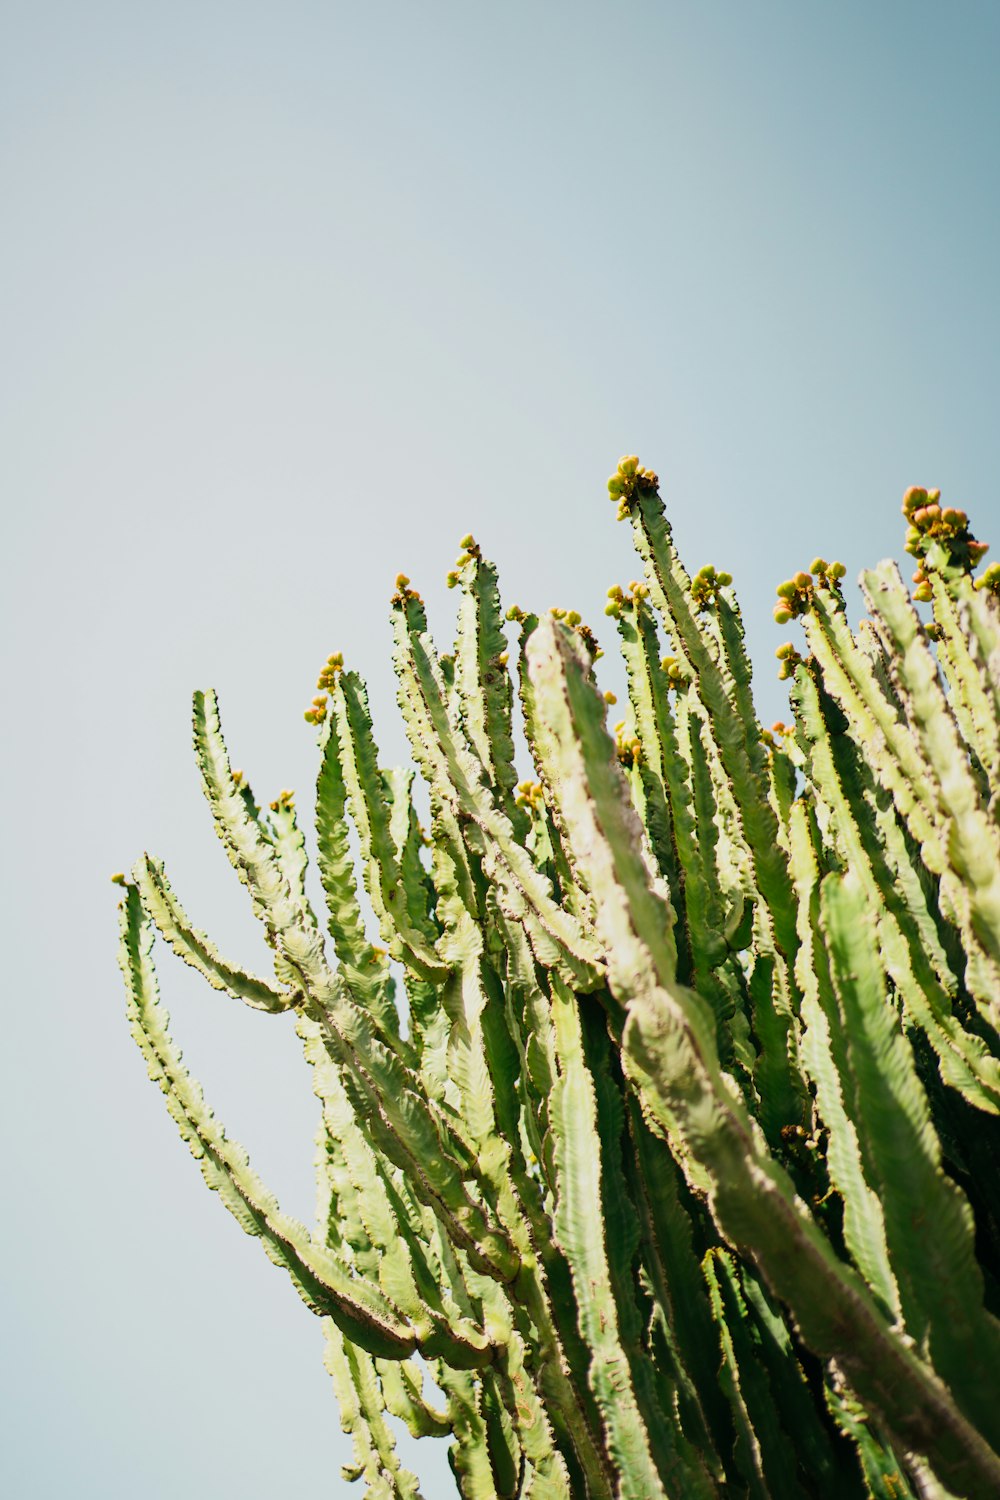 a large cactus plant with lots of green leaves